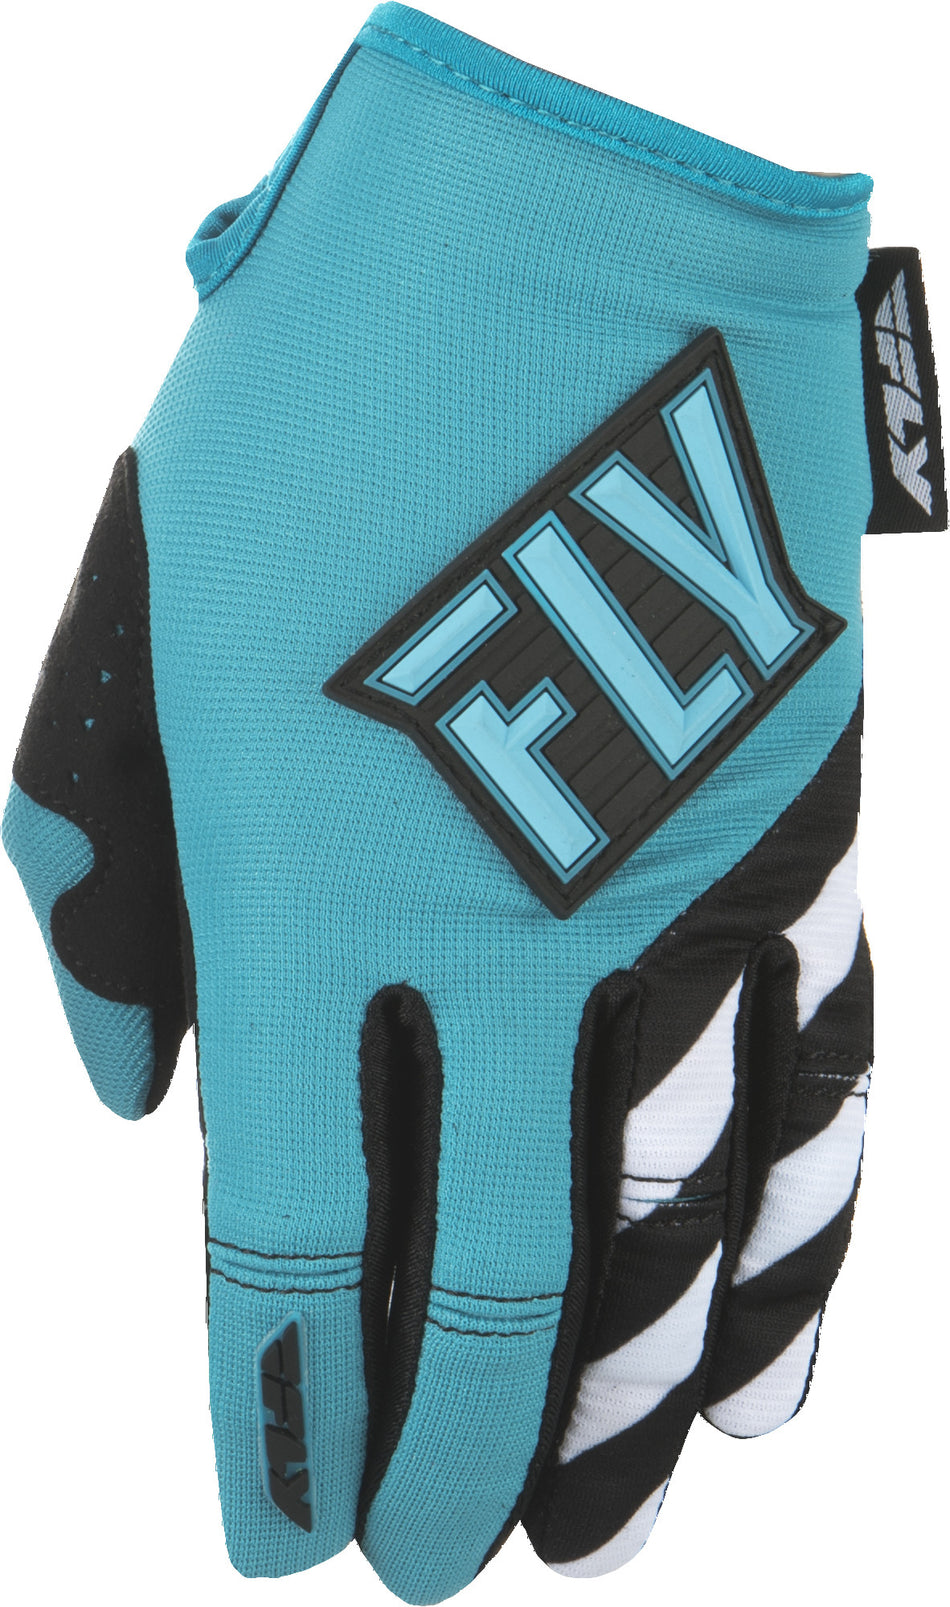 FLY RACING Kinetic Women's Gloves Blue/Teal Yl 371-61104